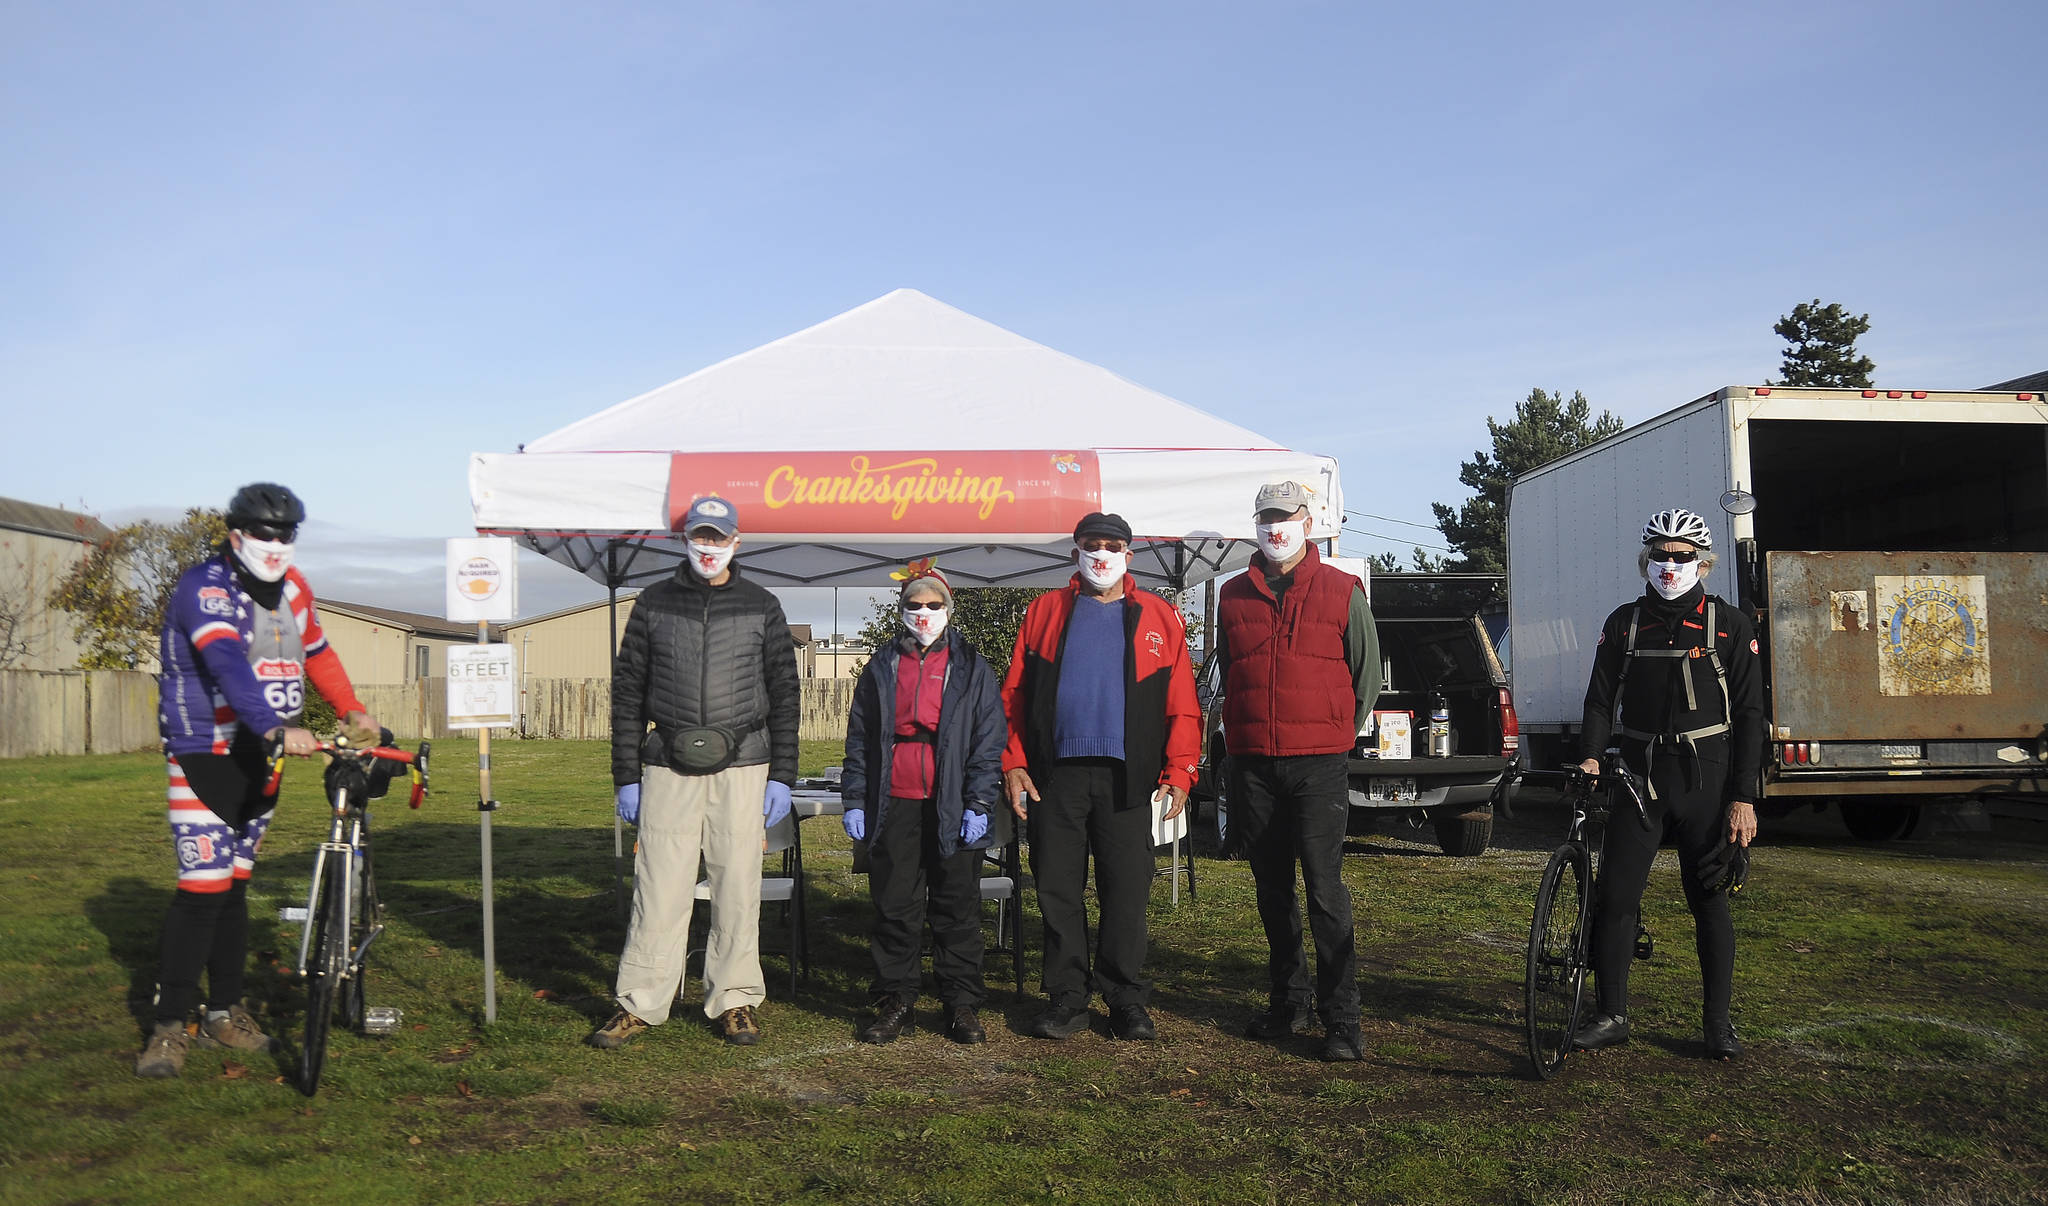 Some of the participants and organizers of the 2020 Cranksgiving event gather to raise funds for the Sequim Food Bank in November. They include, from left, Dave Toman, Tom Coonelly, Suzie Schneider, Dave Neidhardt, Al Streeter and Ken Stringer. Sequim Gazette photo by Michael Dashiell